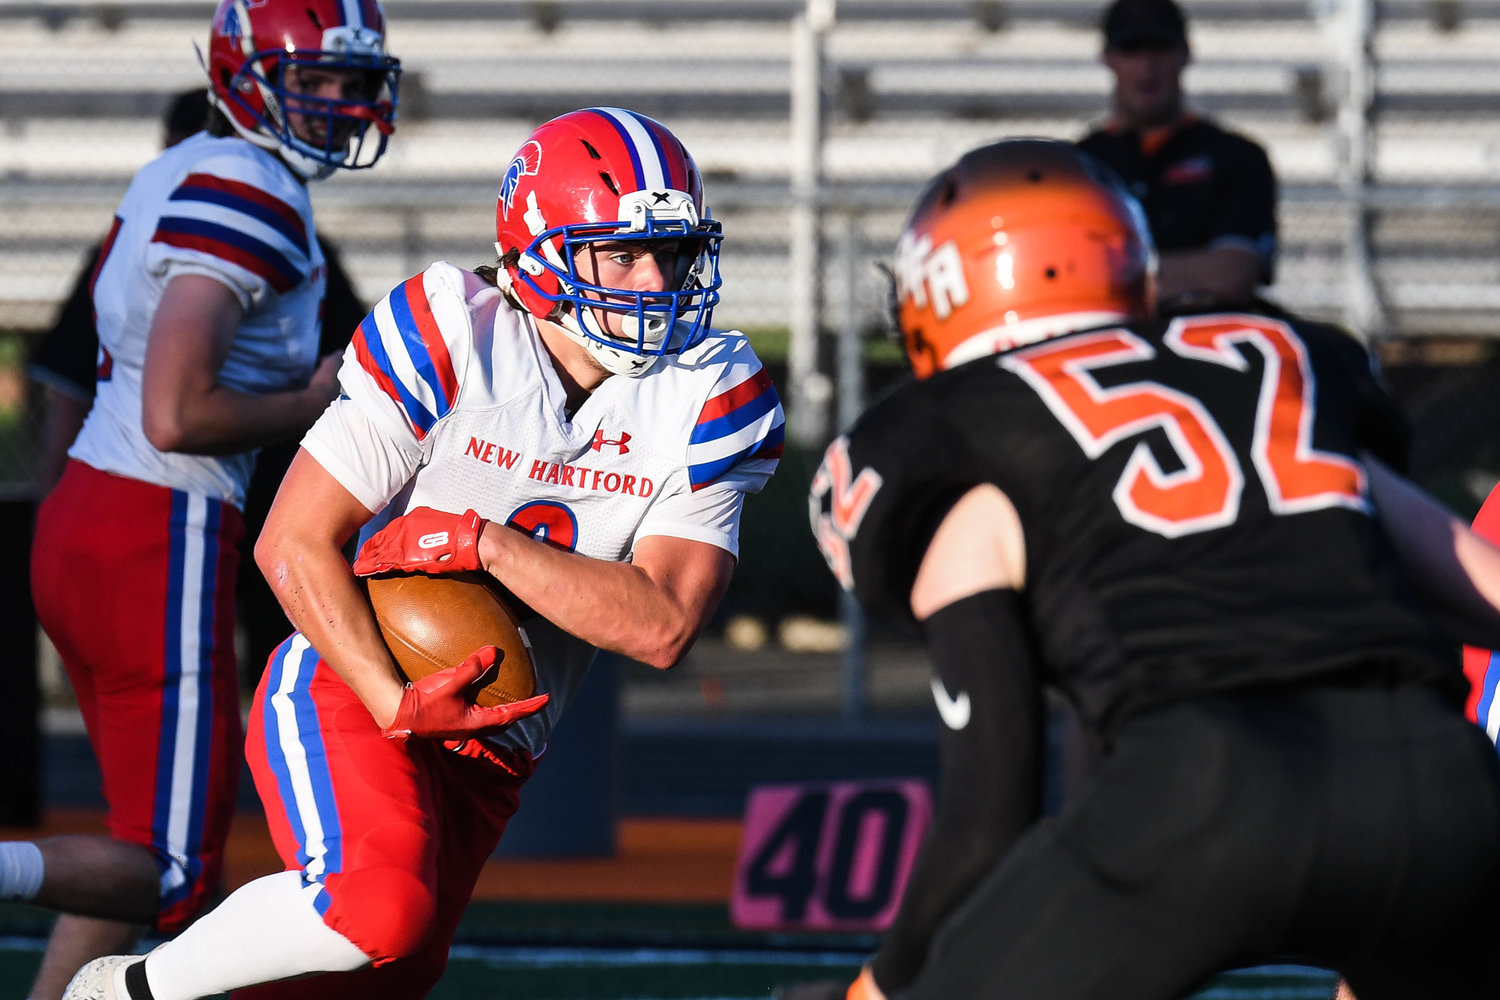 New Hartford running back Alex Collver runs during the game against Rome Free Academy on Friday at RFA Stadium. Collver ran 21 times for 127 yards and a score in the team's 52-26 win to open the season. Moving in for the tackle is RFA's Josiah Holmes.